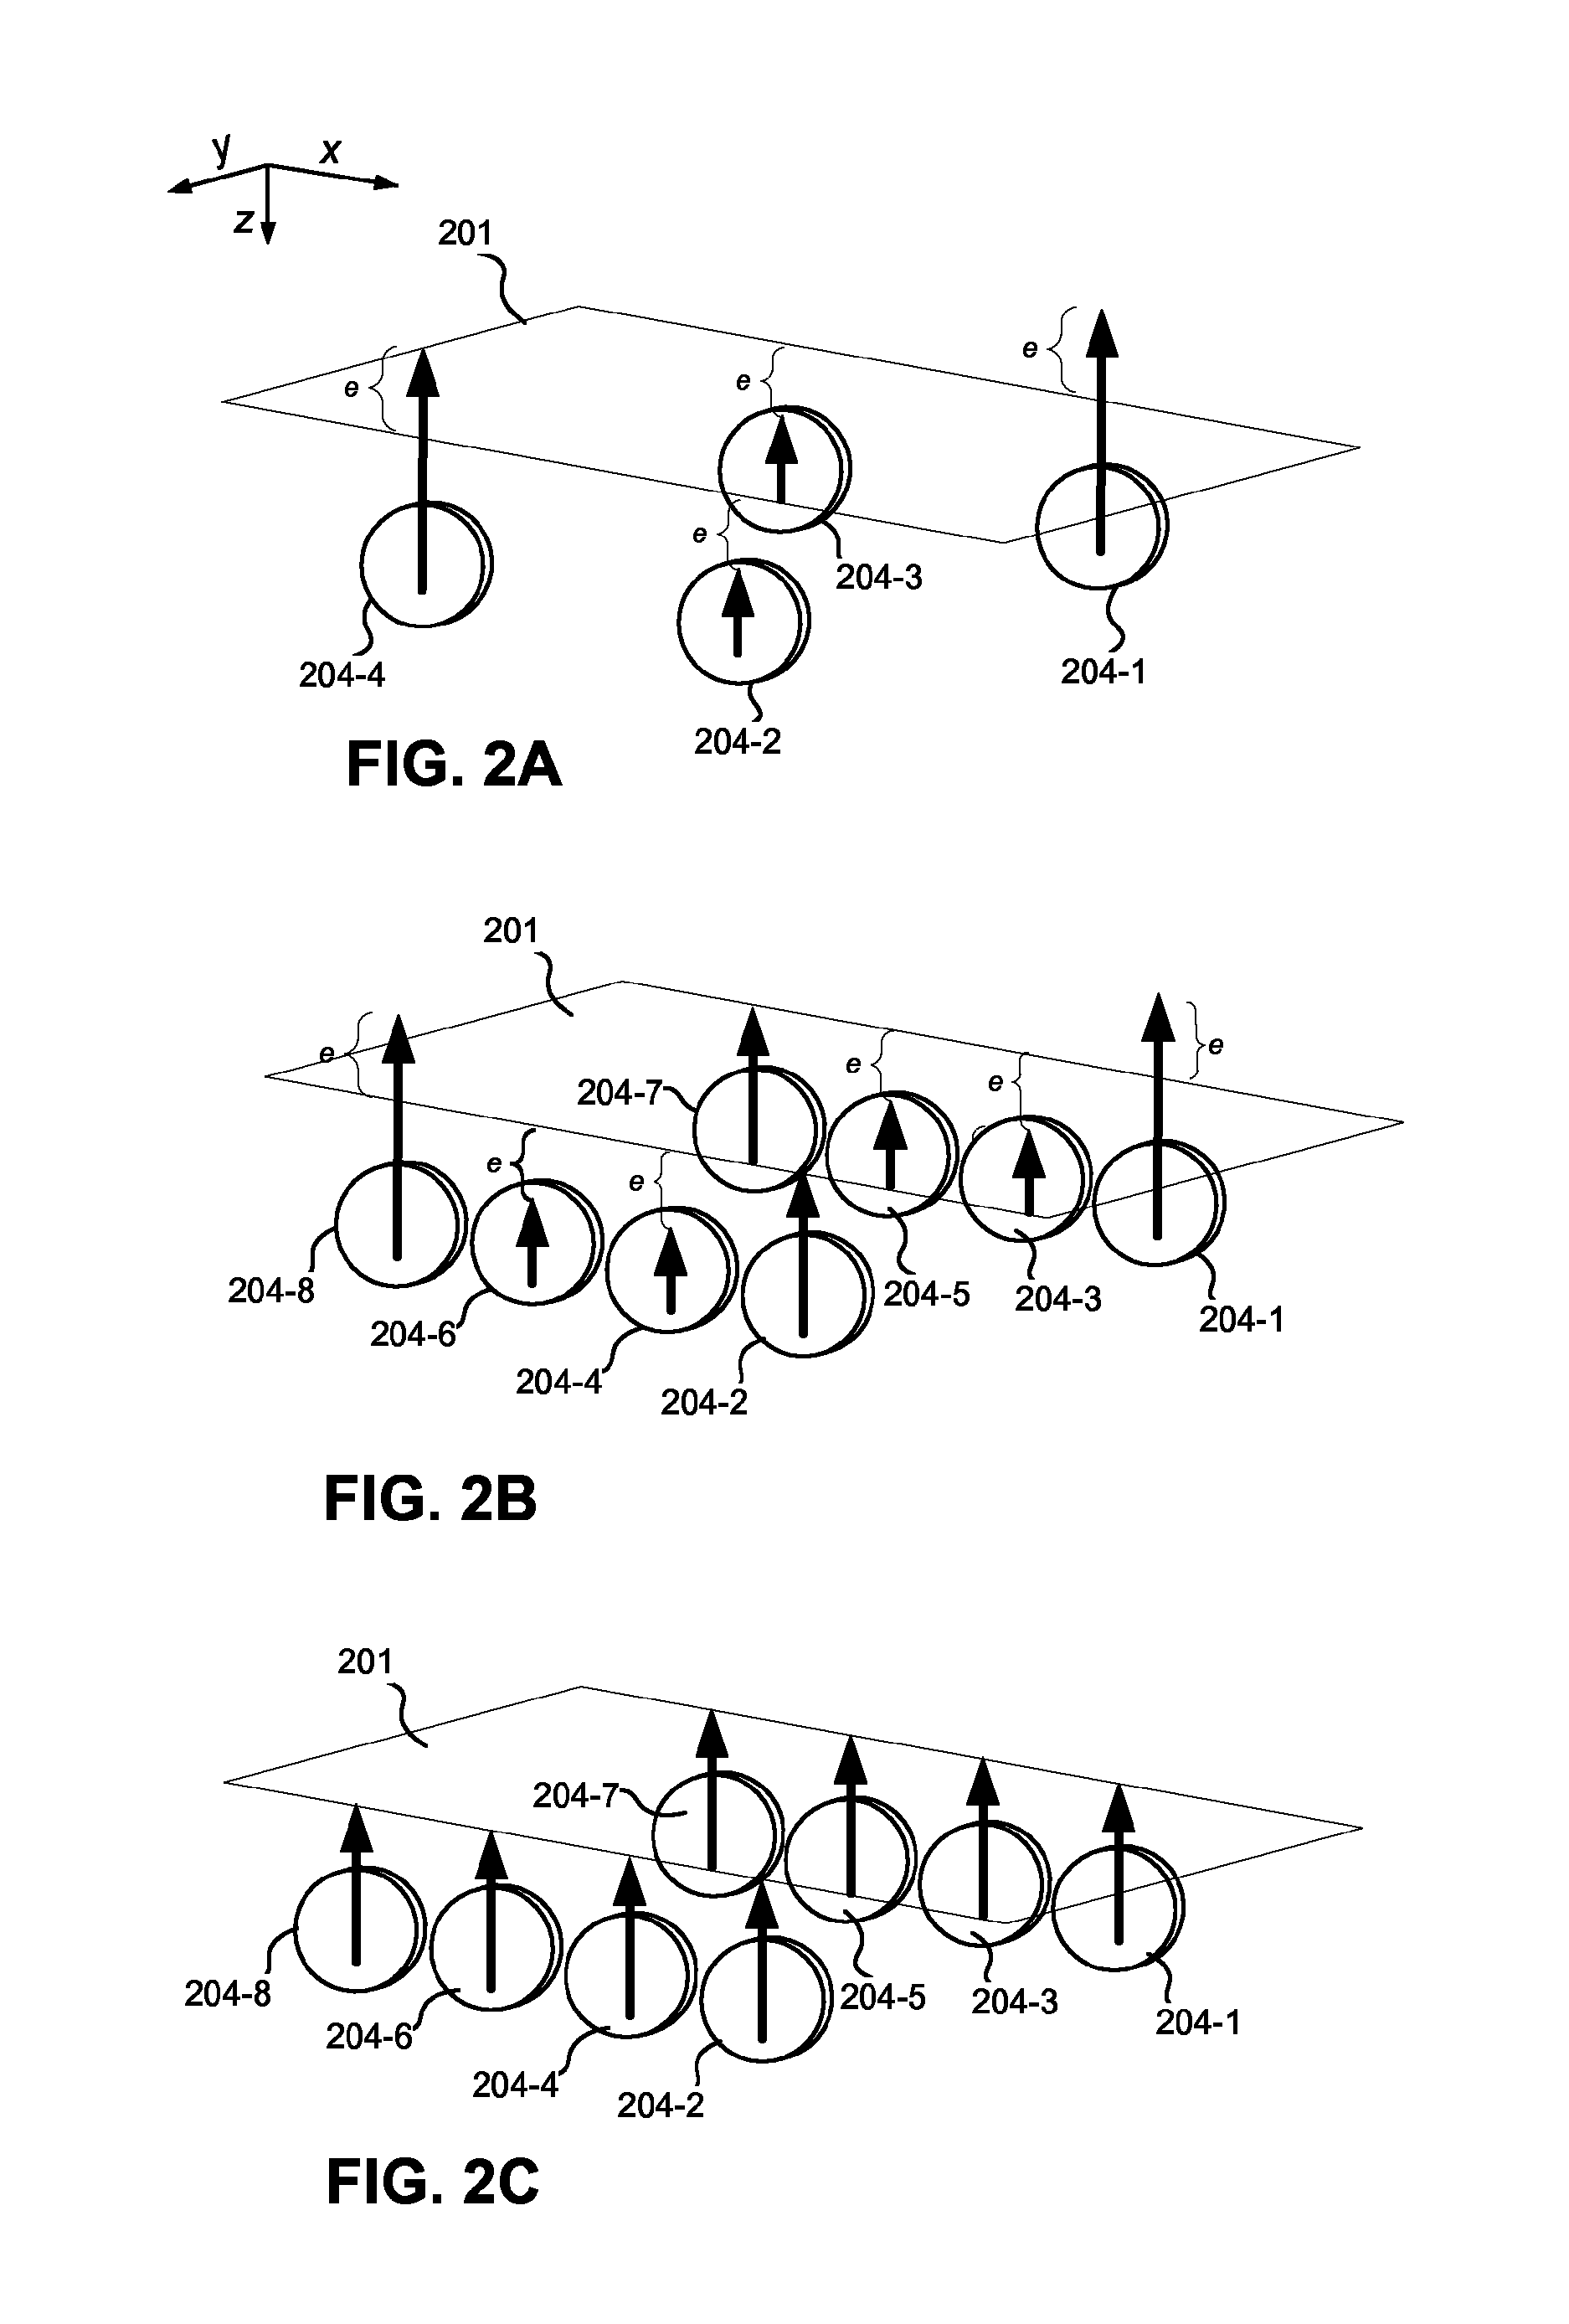 Ride height control system and method for controlling load distribution at target ride height in a vehicle suspension system